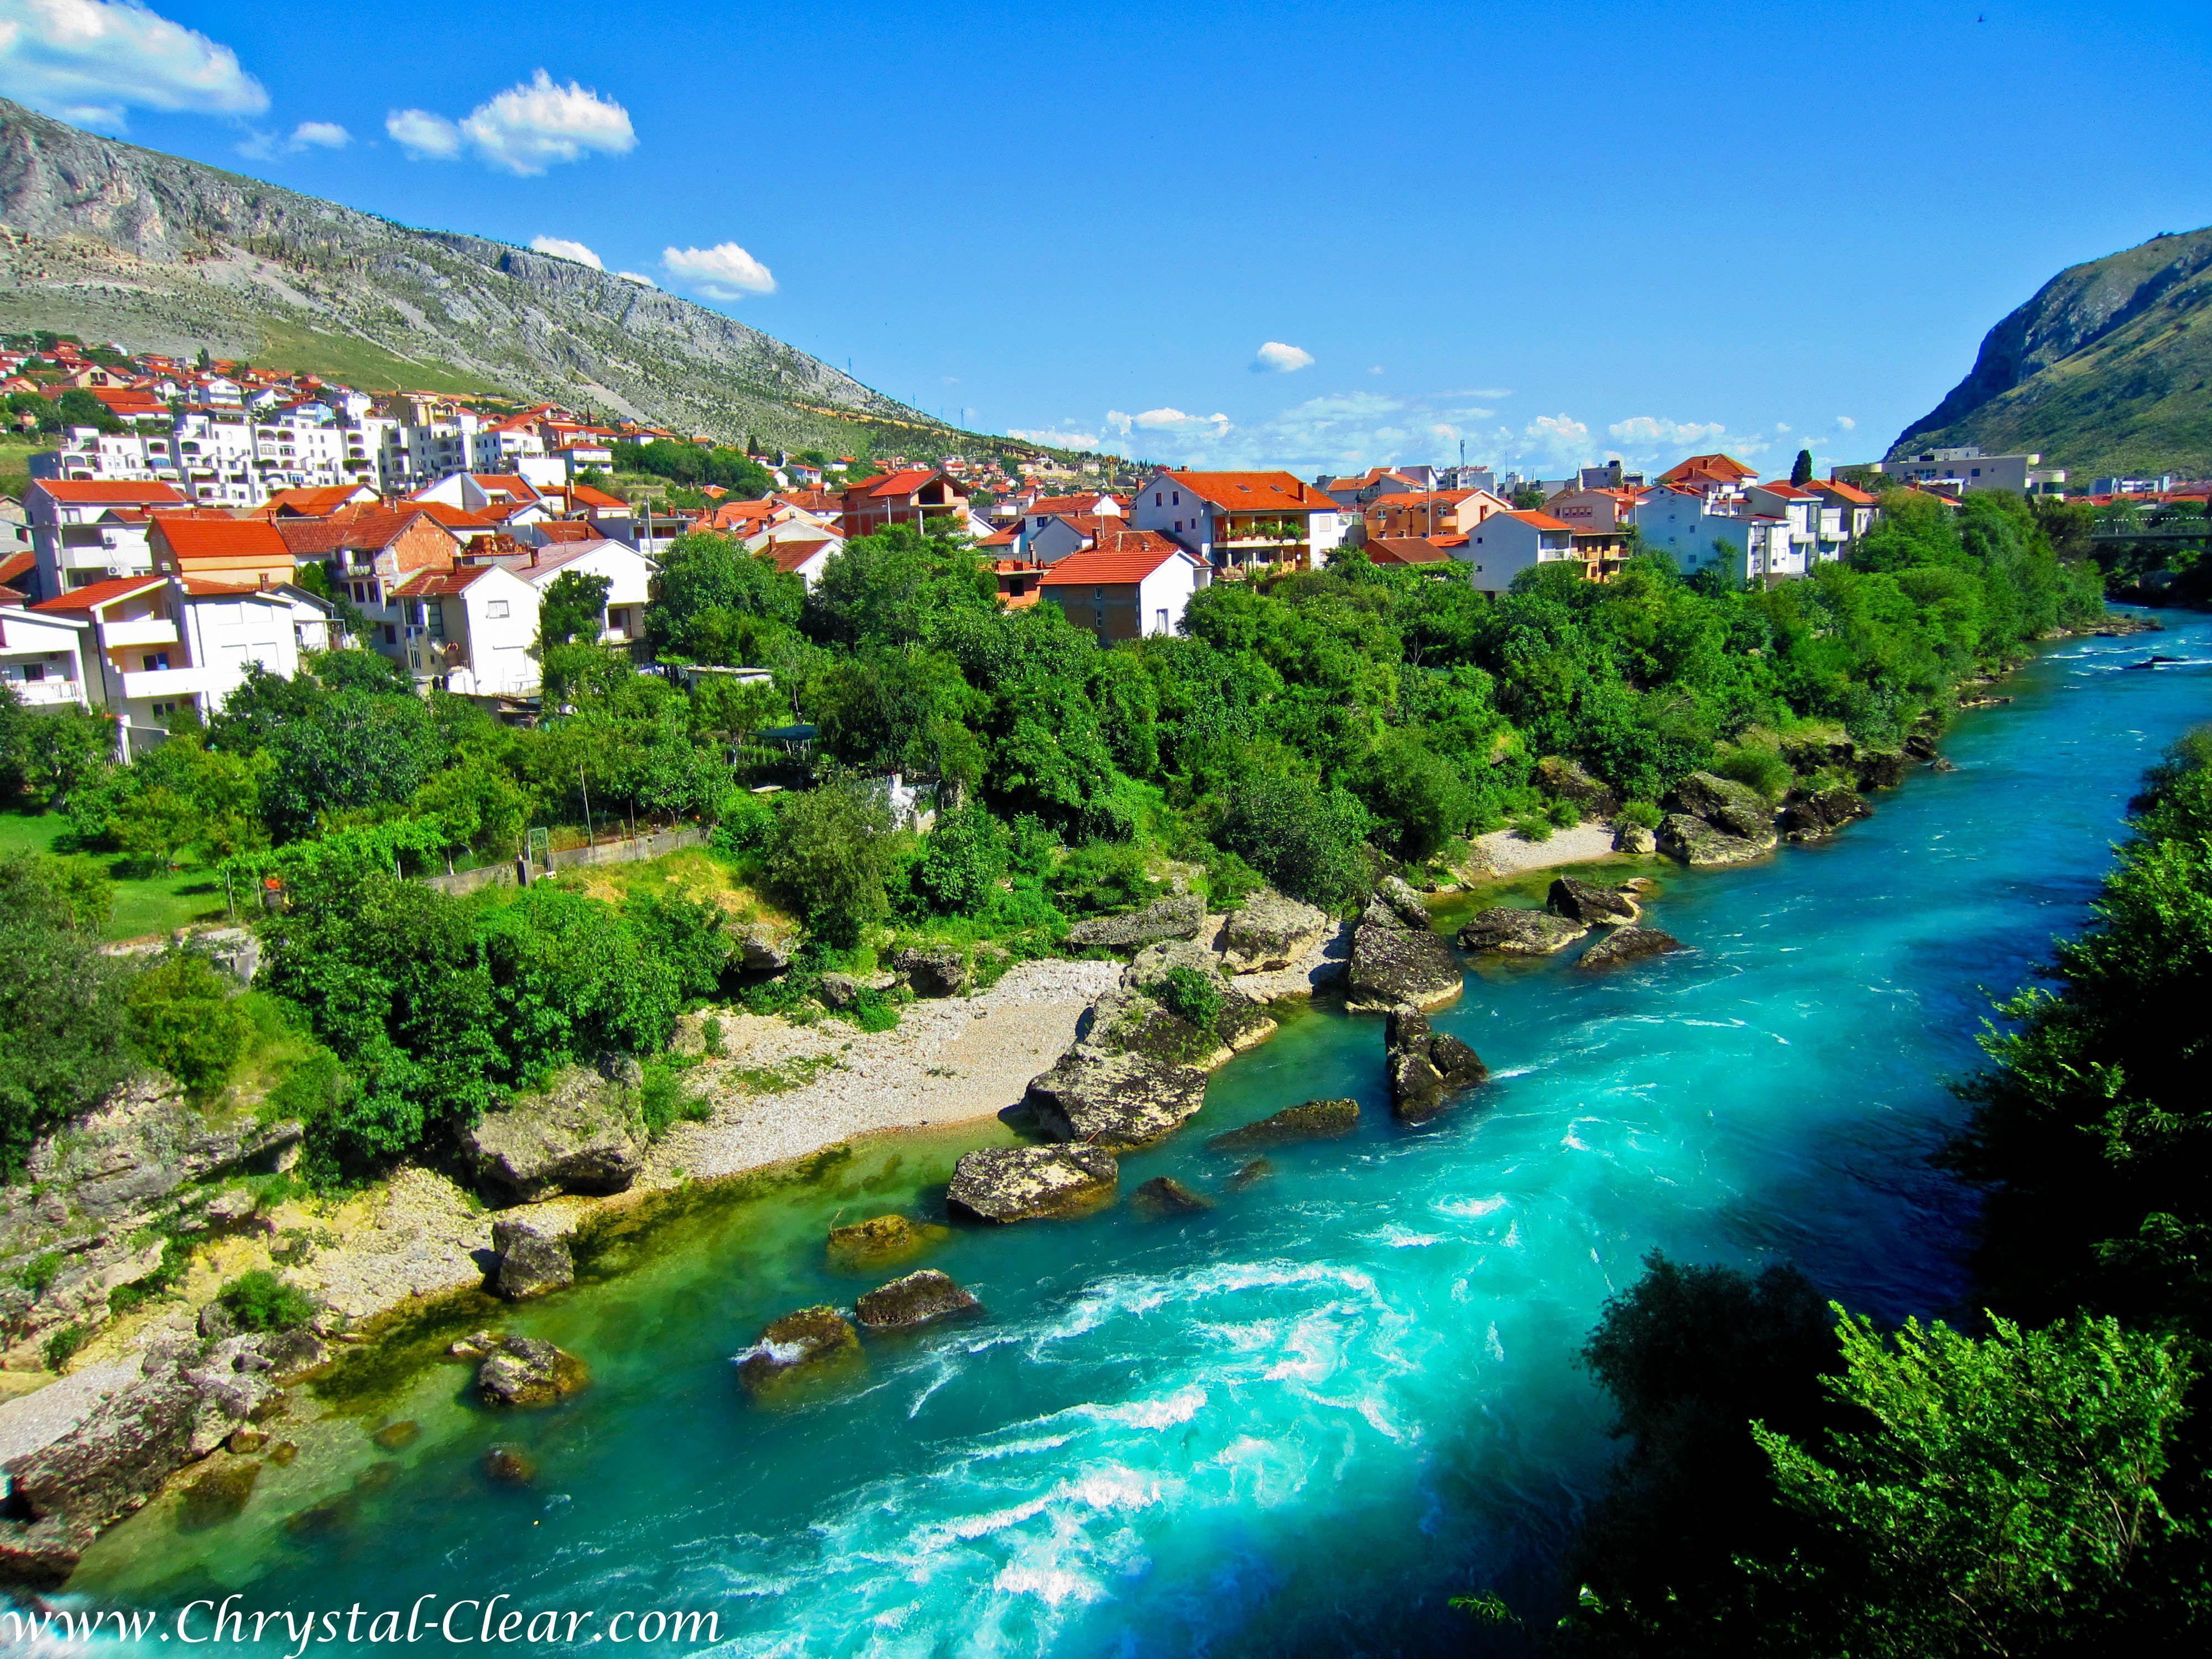 Bosnia Wallpaper for PC. Full HD Picture